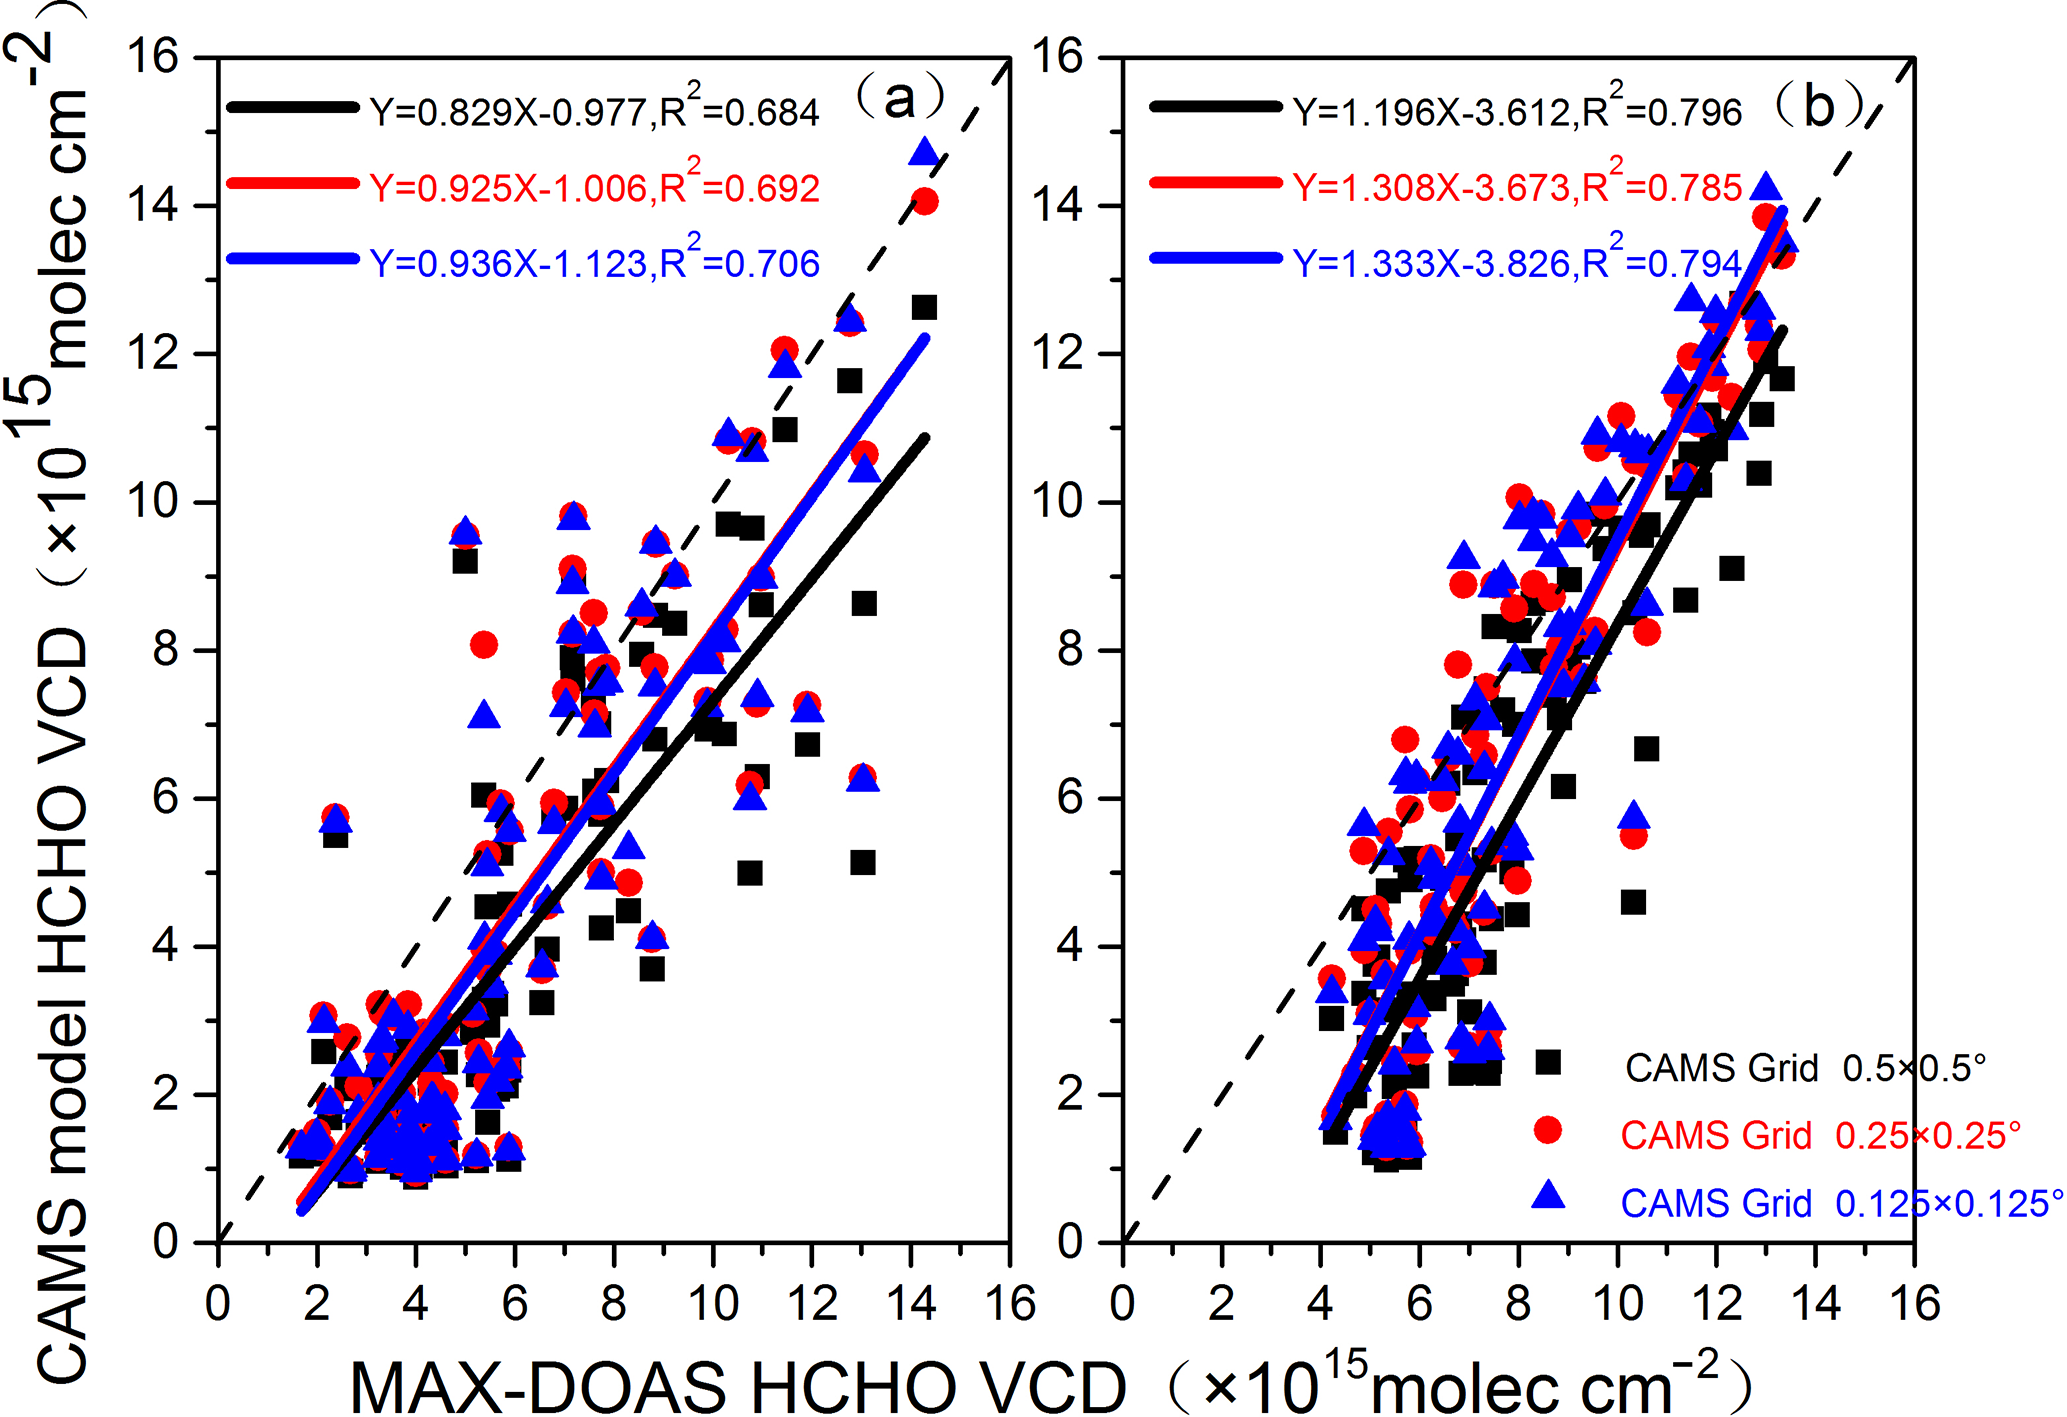 ACP - Ground-based MAX-DOAS observations of tropospheric formaldehyde VCDs and comparisons with ...